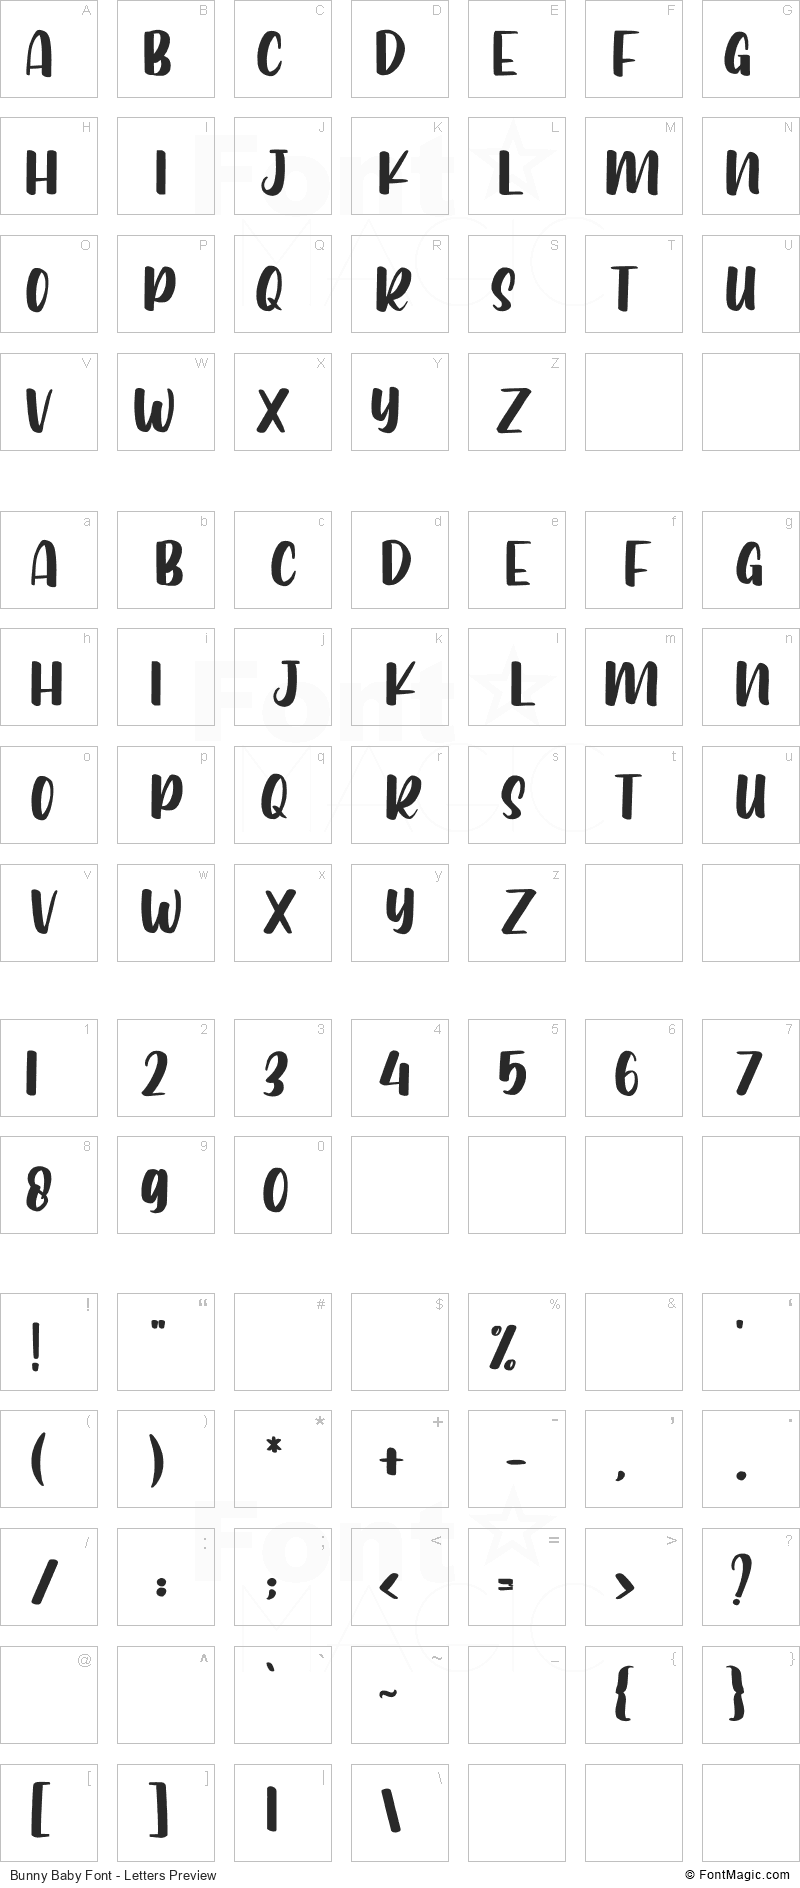 Bunny Baby Font - All Latters Preview Chart